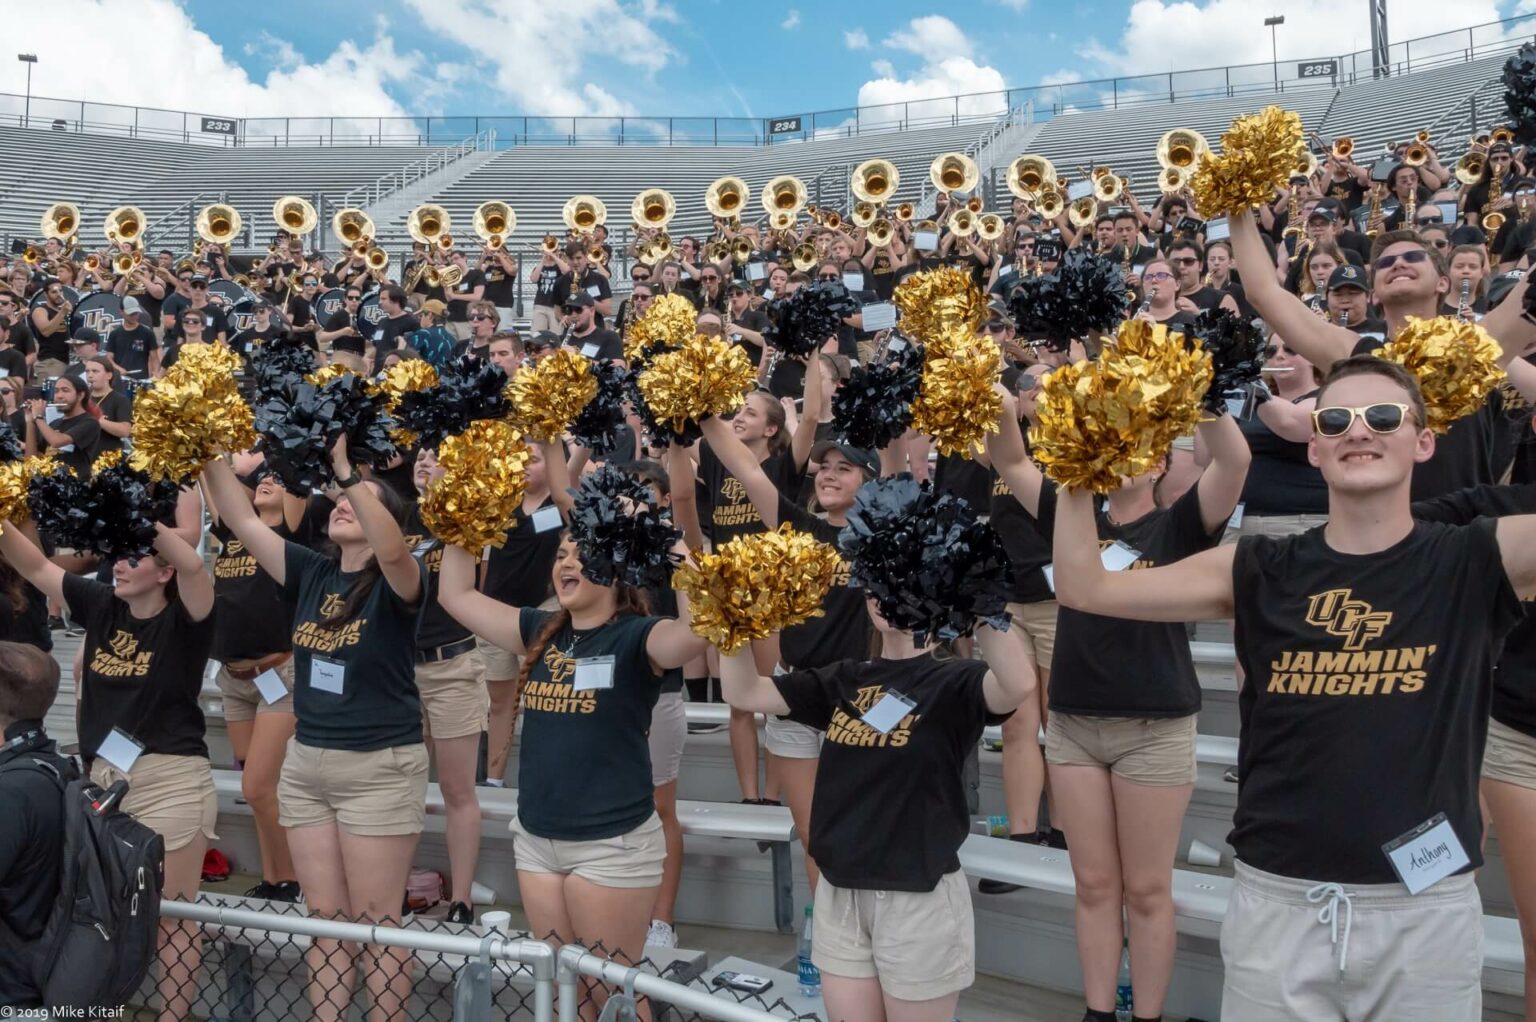 Music UCF Bands